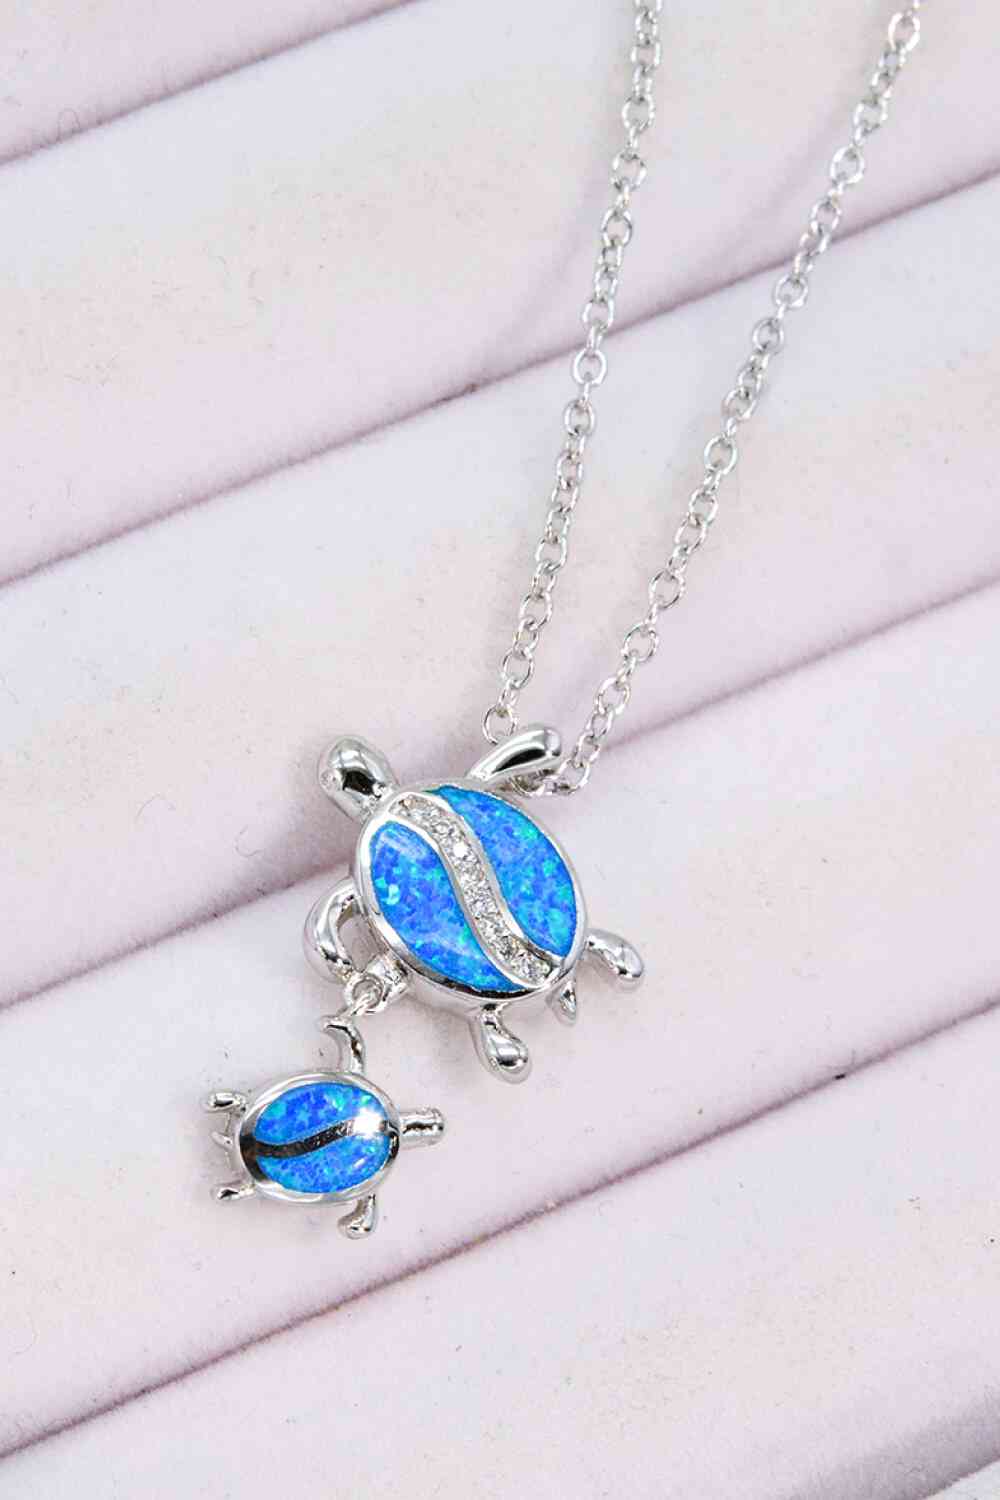 Turtle Pendant Necklace-Blue Opal/Circon/925 Sterling Silver